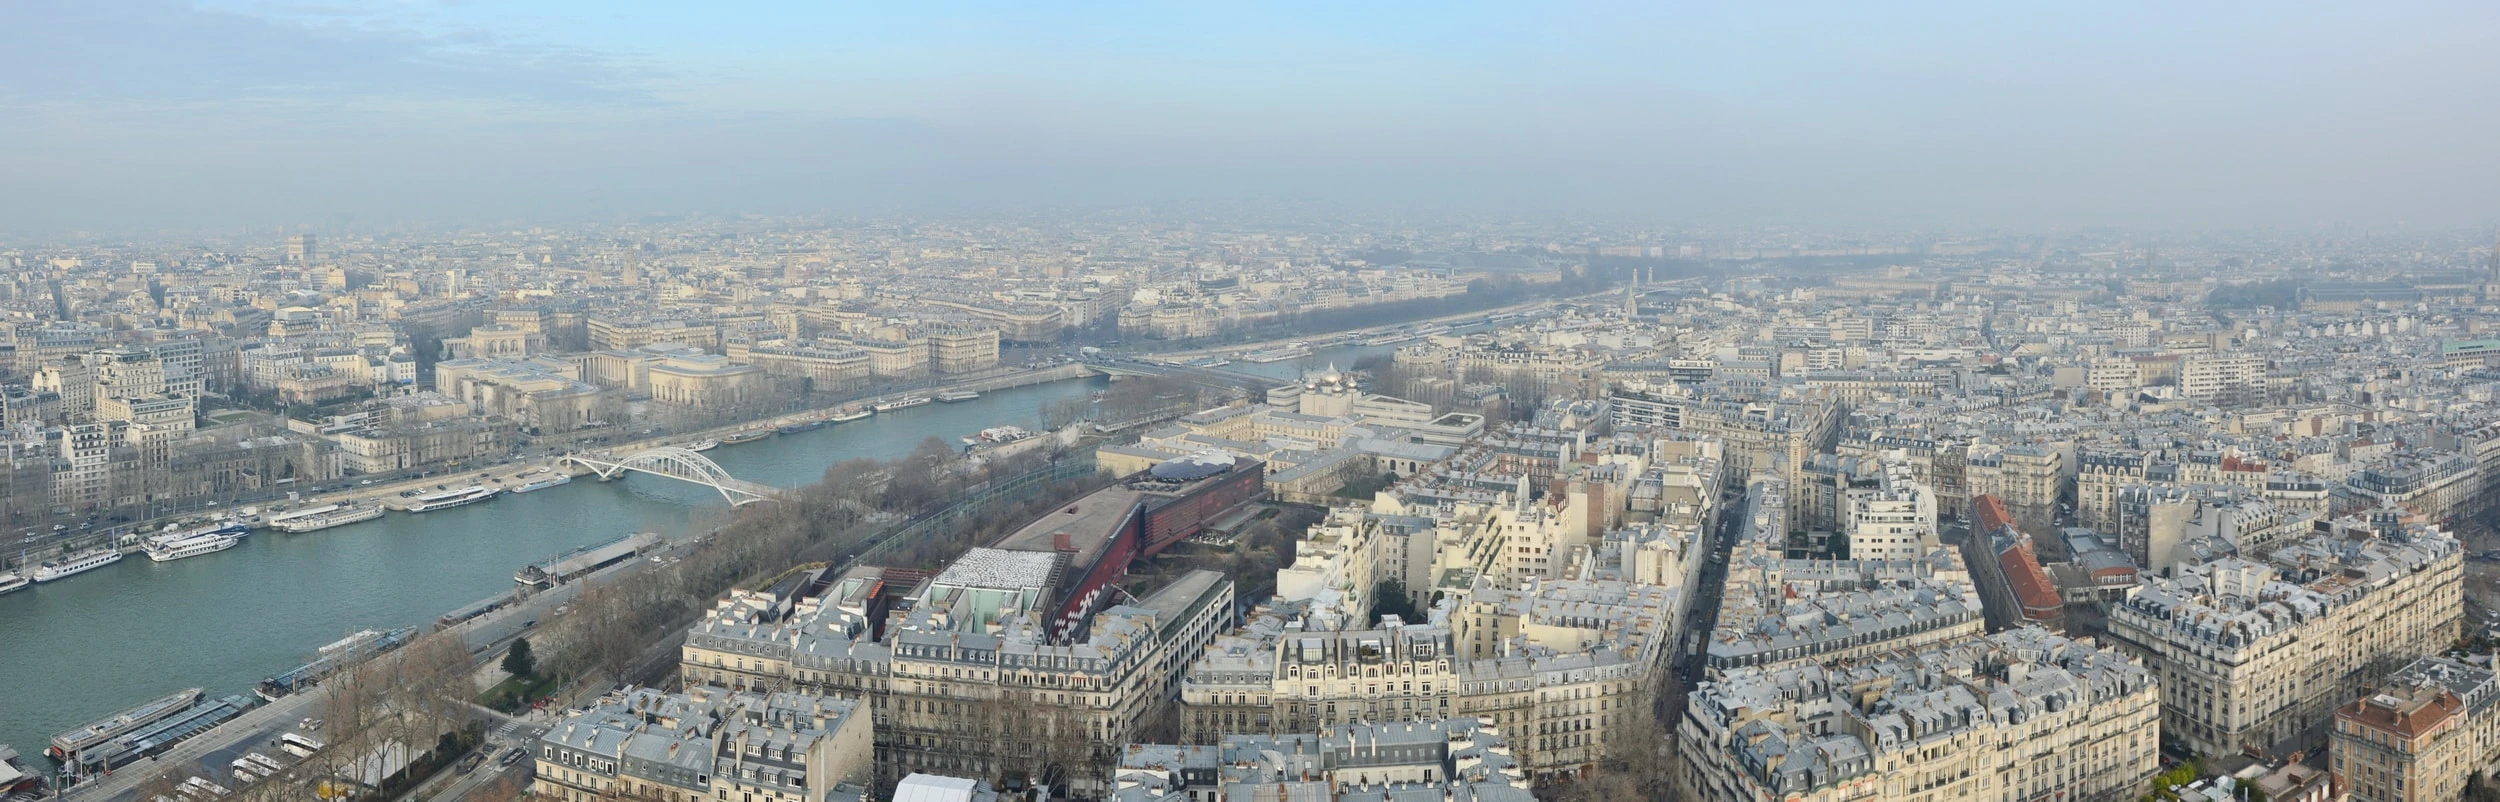 Looking northeast from the 2nd floor of the Eiffel Tower